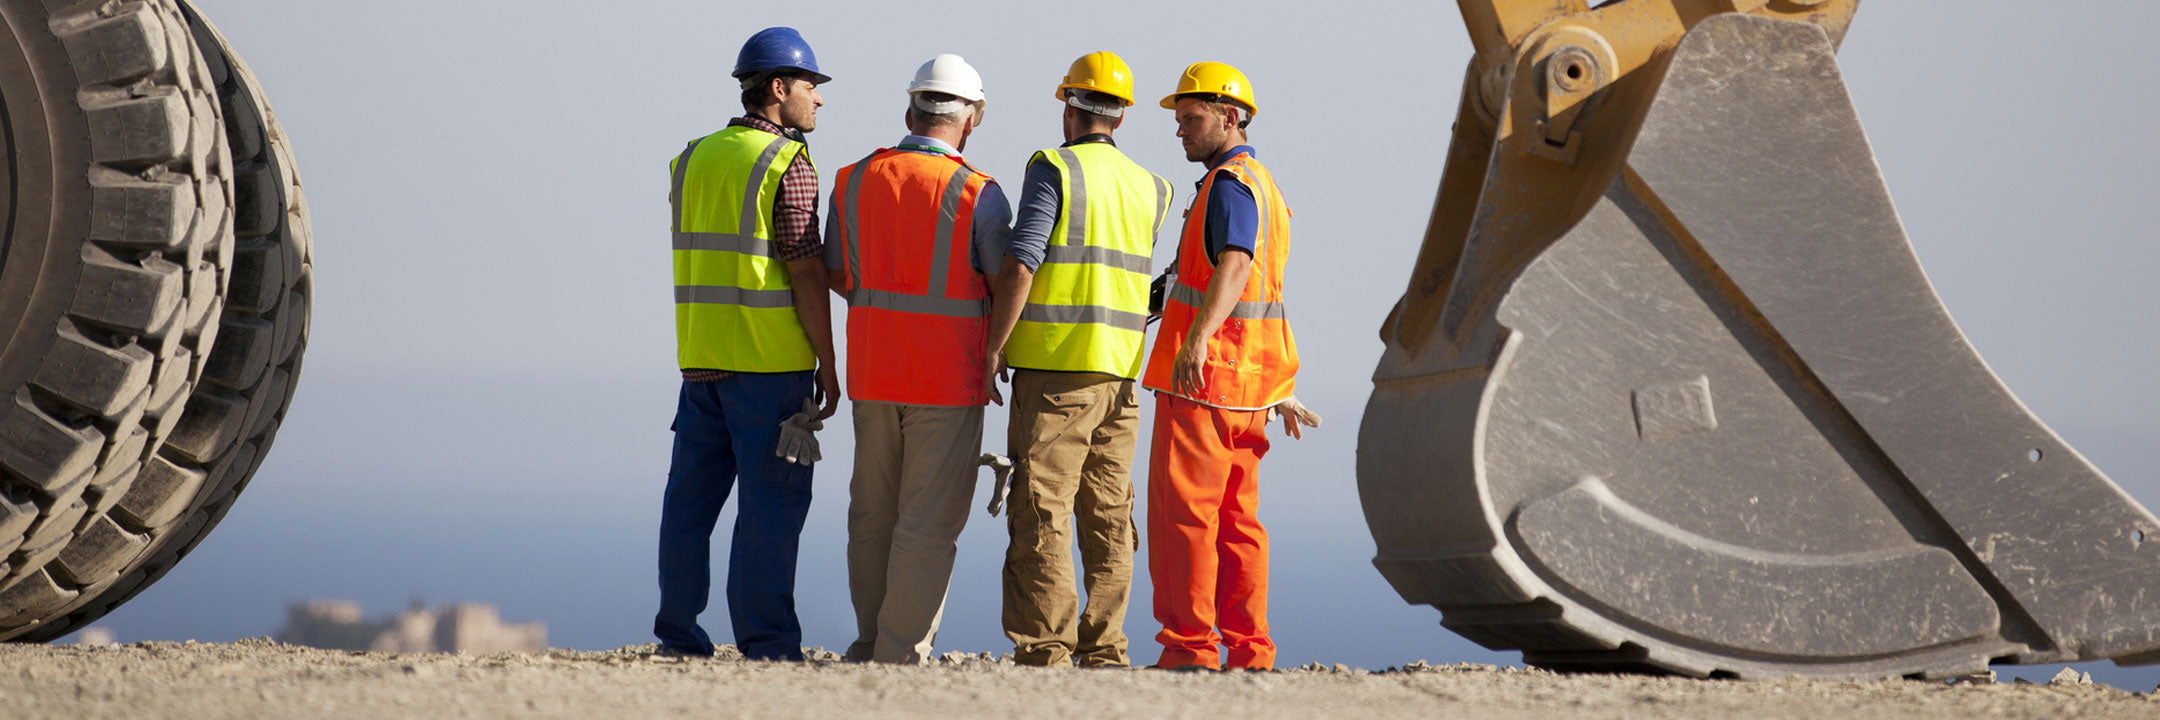 Four construction workers in safety gear having a discussion near large machinery